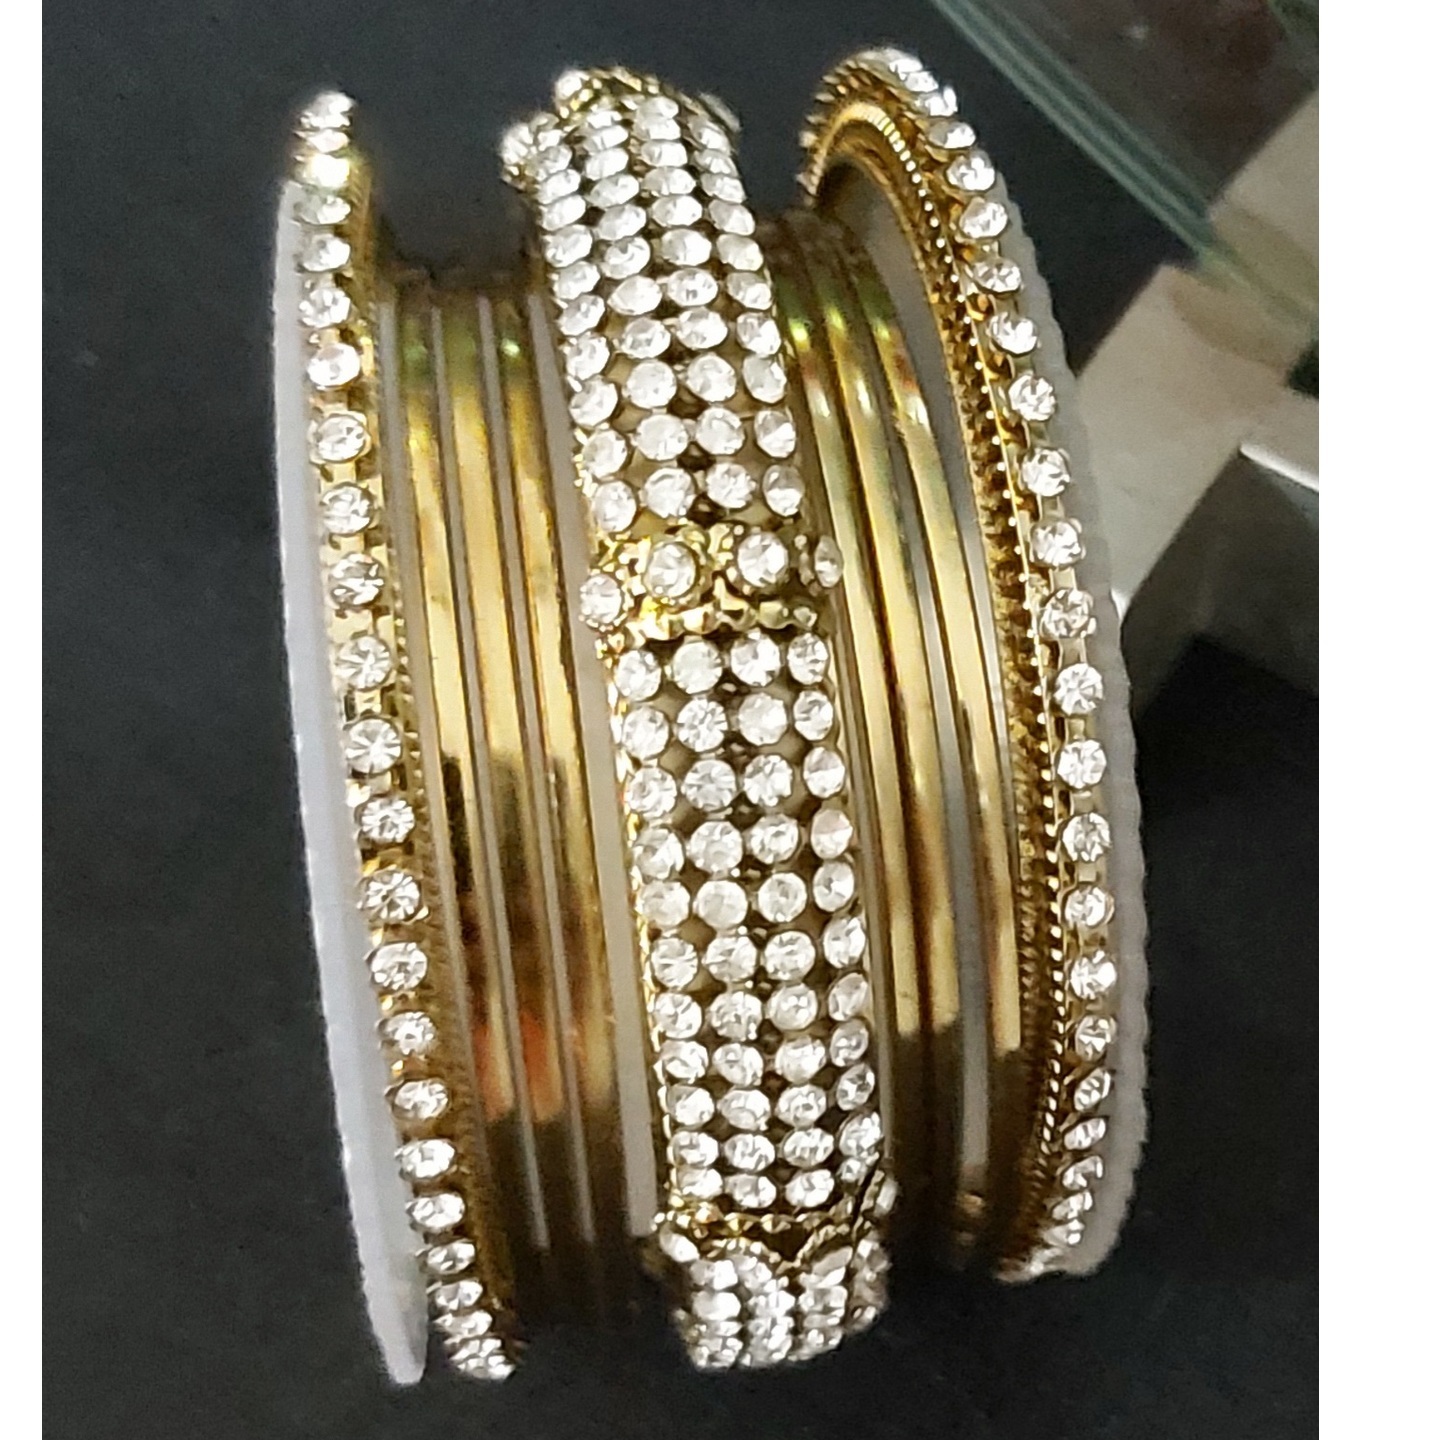 Gold Bangles with CZ stones